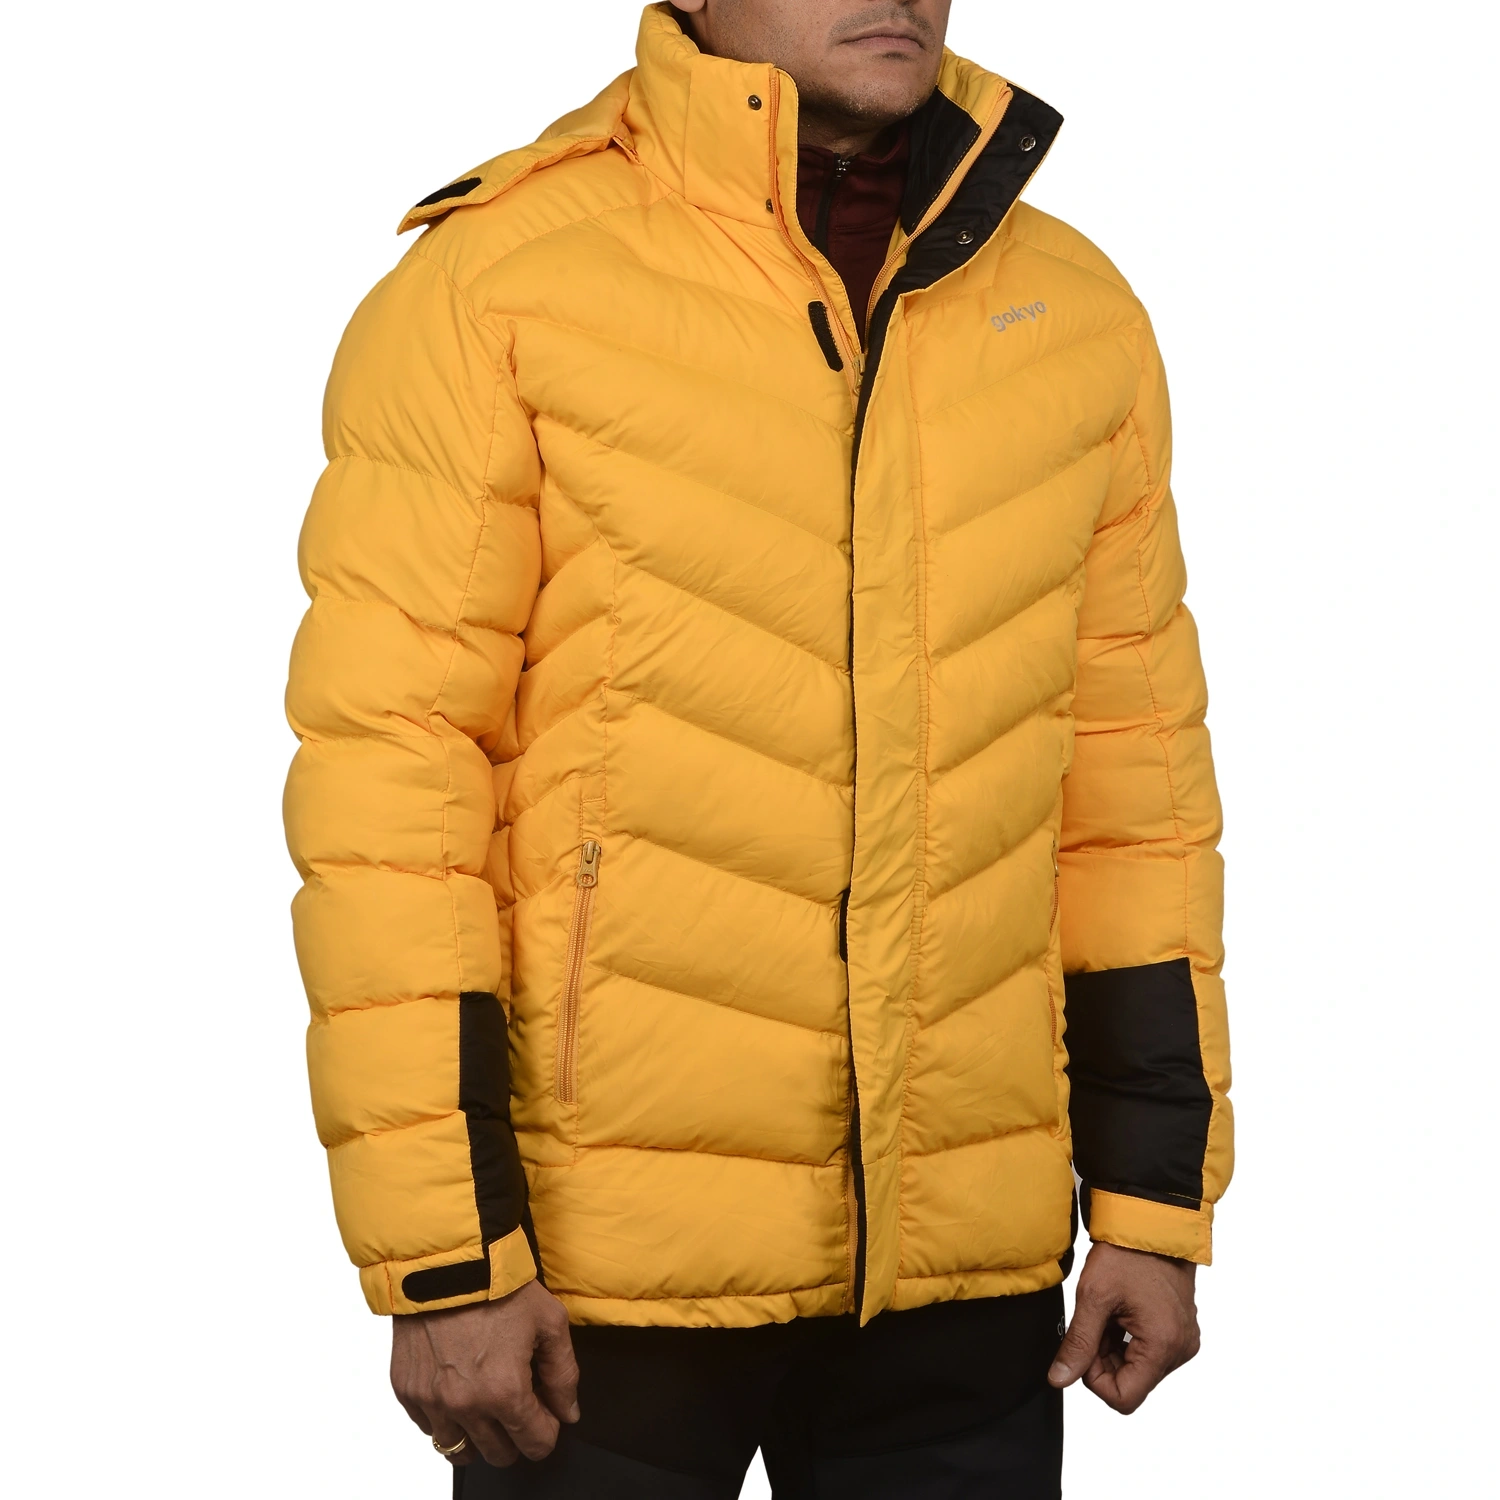 K2 Survivor Down Jacket for Men: Stylized Functionality for Extreme Cold Weather Expeditions (Up to -20°C)-L-Yellow-1